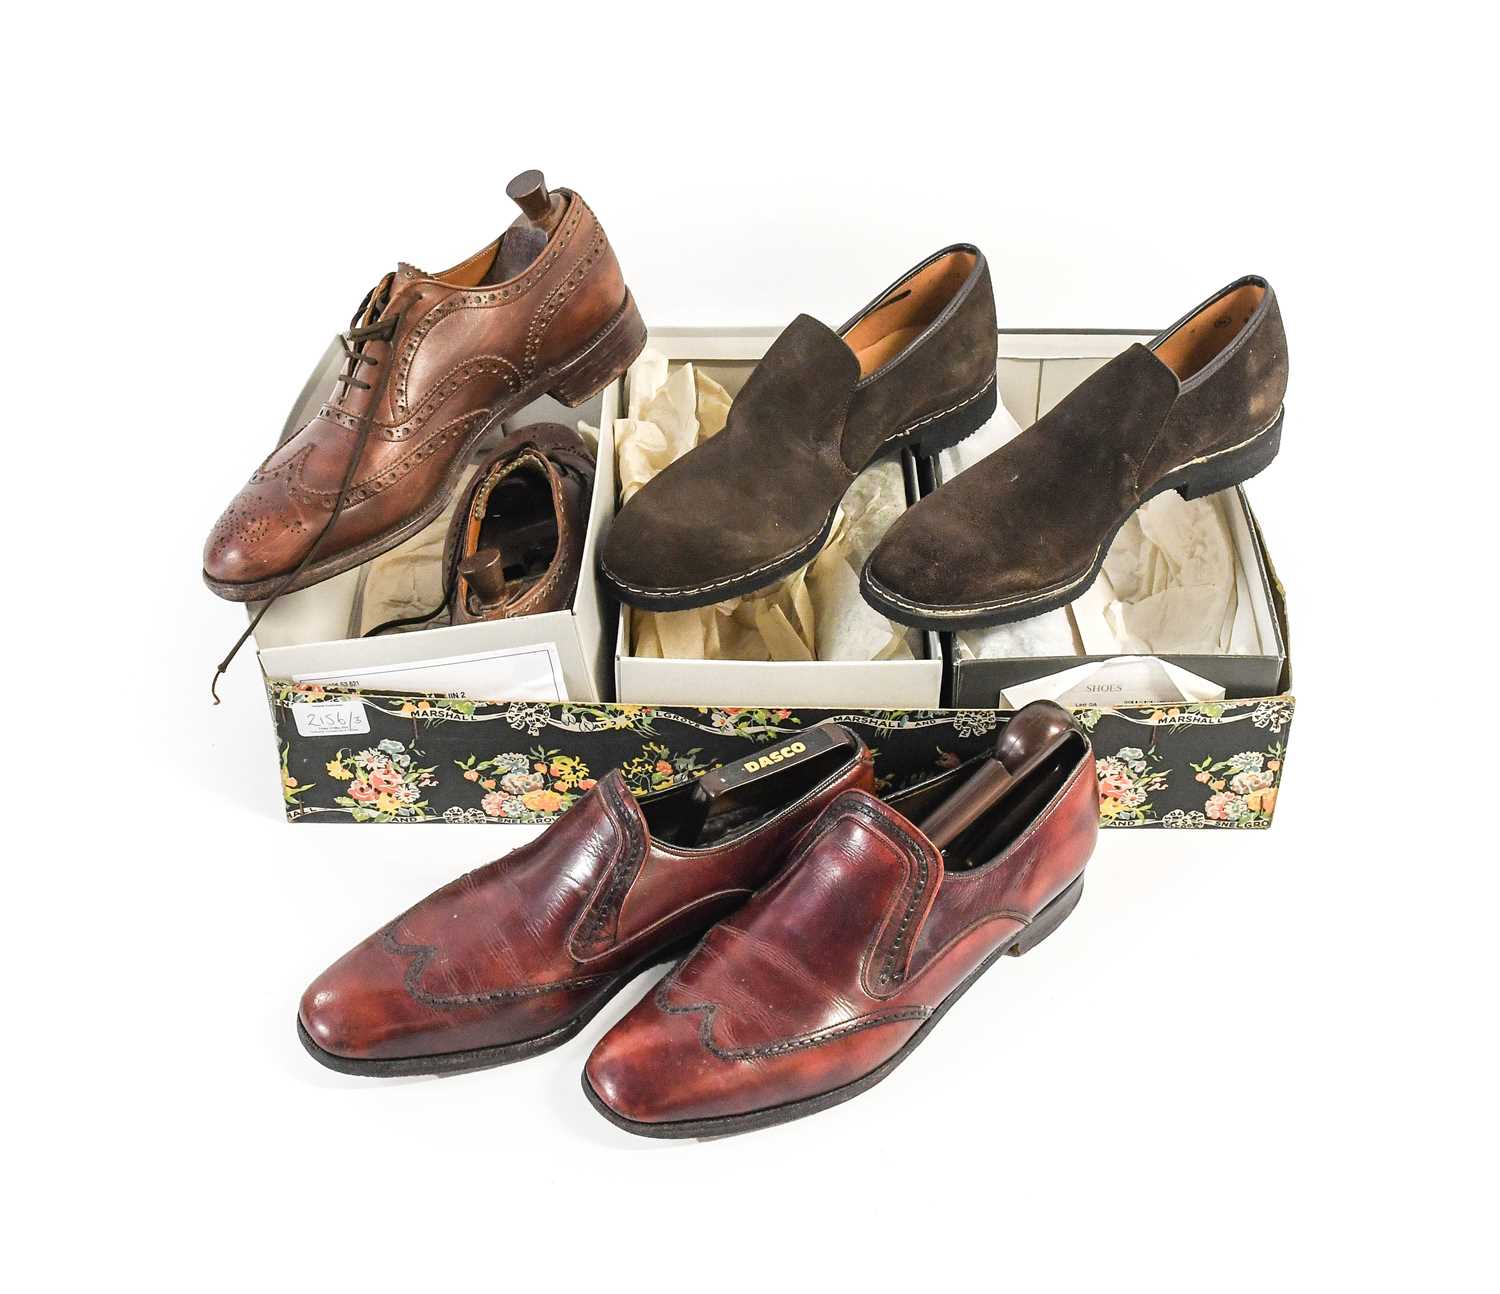 Assorted 20th Century Gents Costume Accessories comprising a pair of brown leather lace up brogues - Image 3 of 4